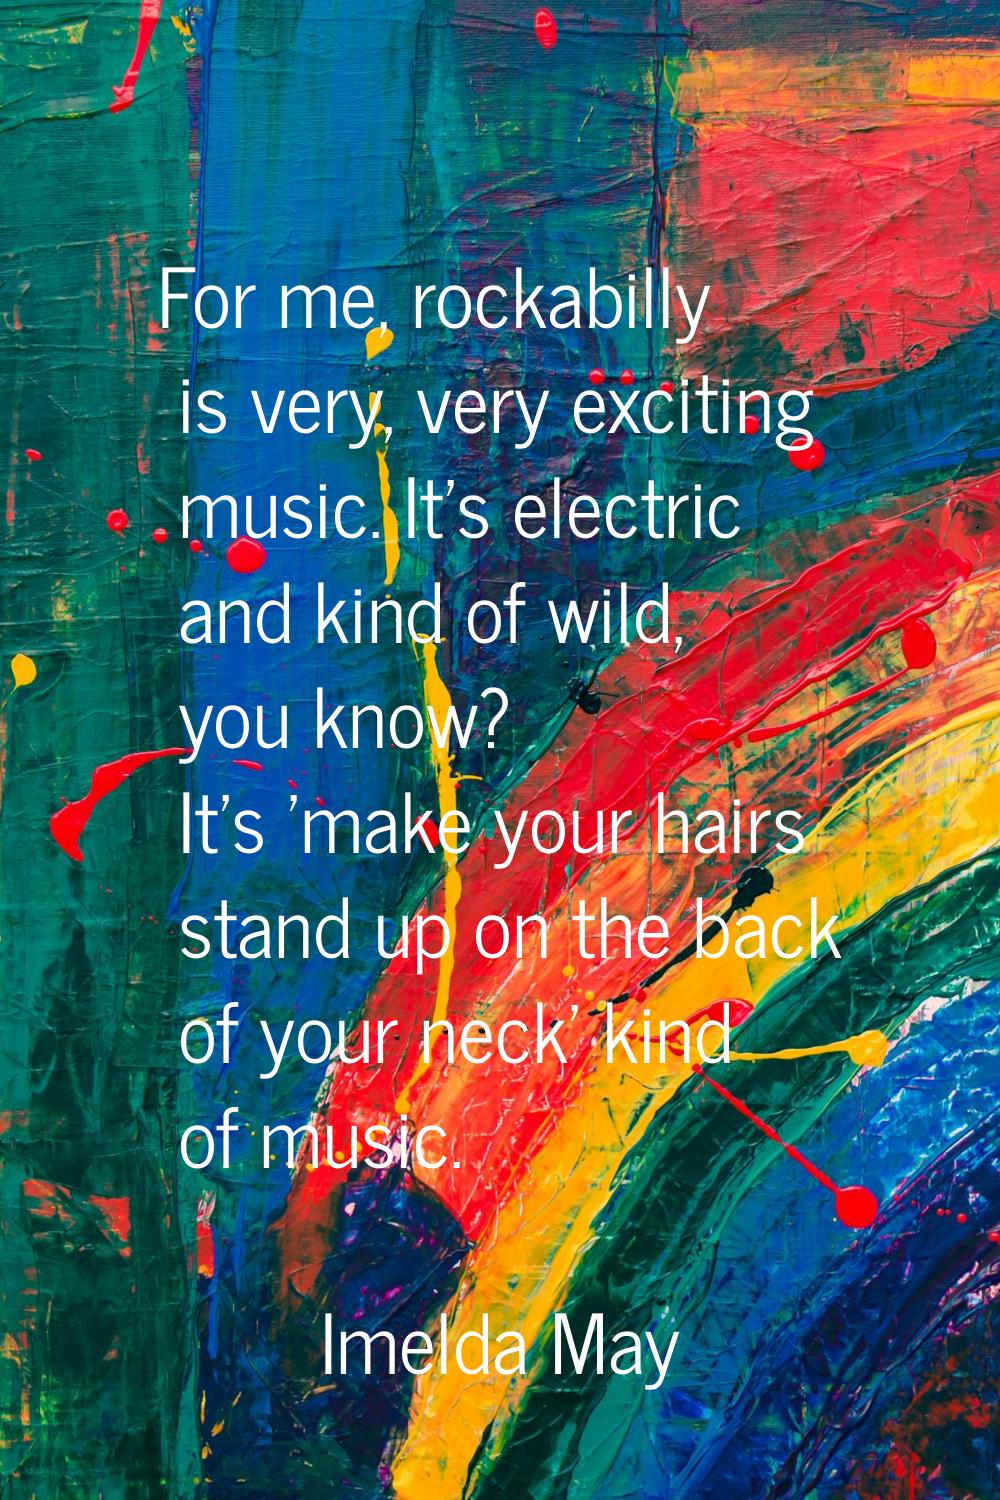 For me, rockabilly is very, very exciting music. It's electric and kind of wild, you know? It's 'ma